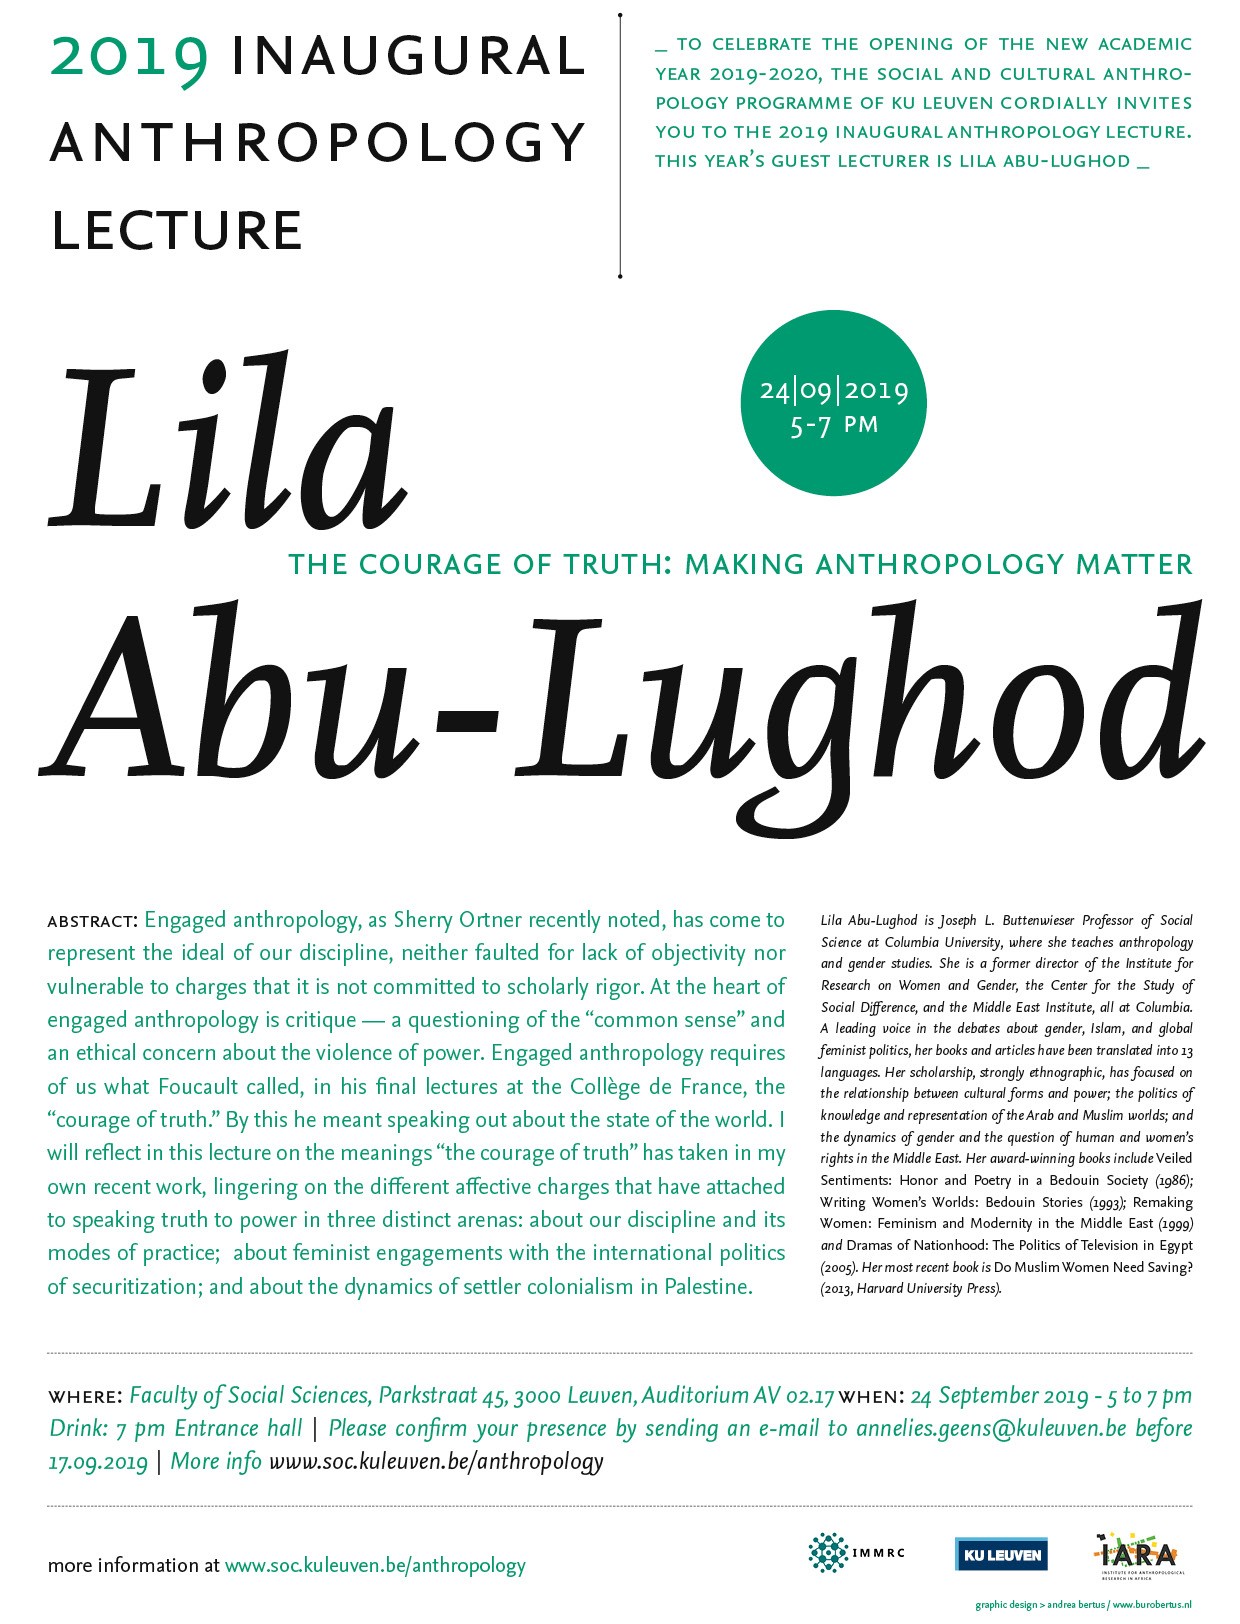 Event Poster for lecture